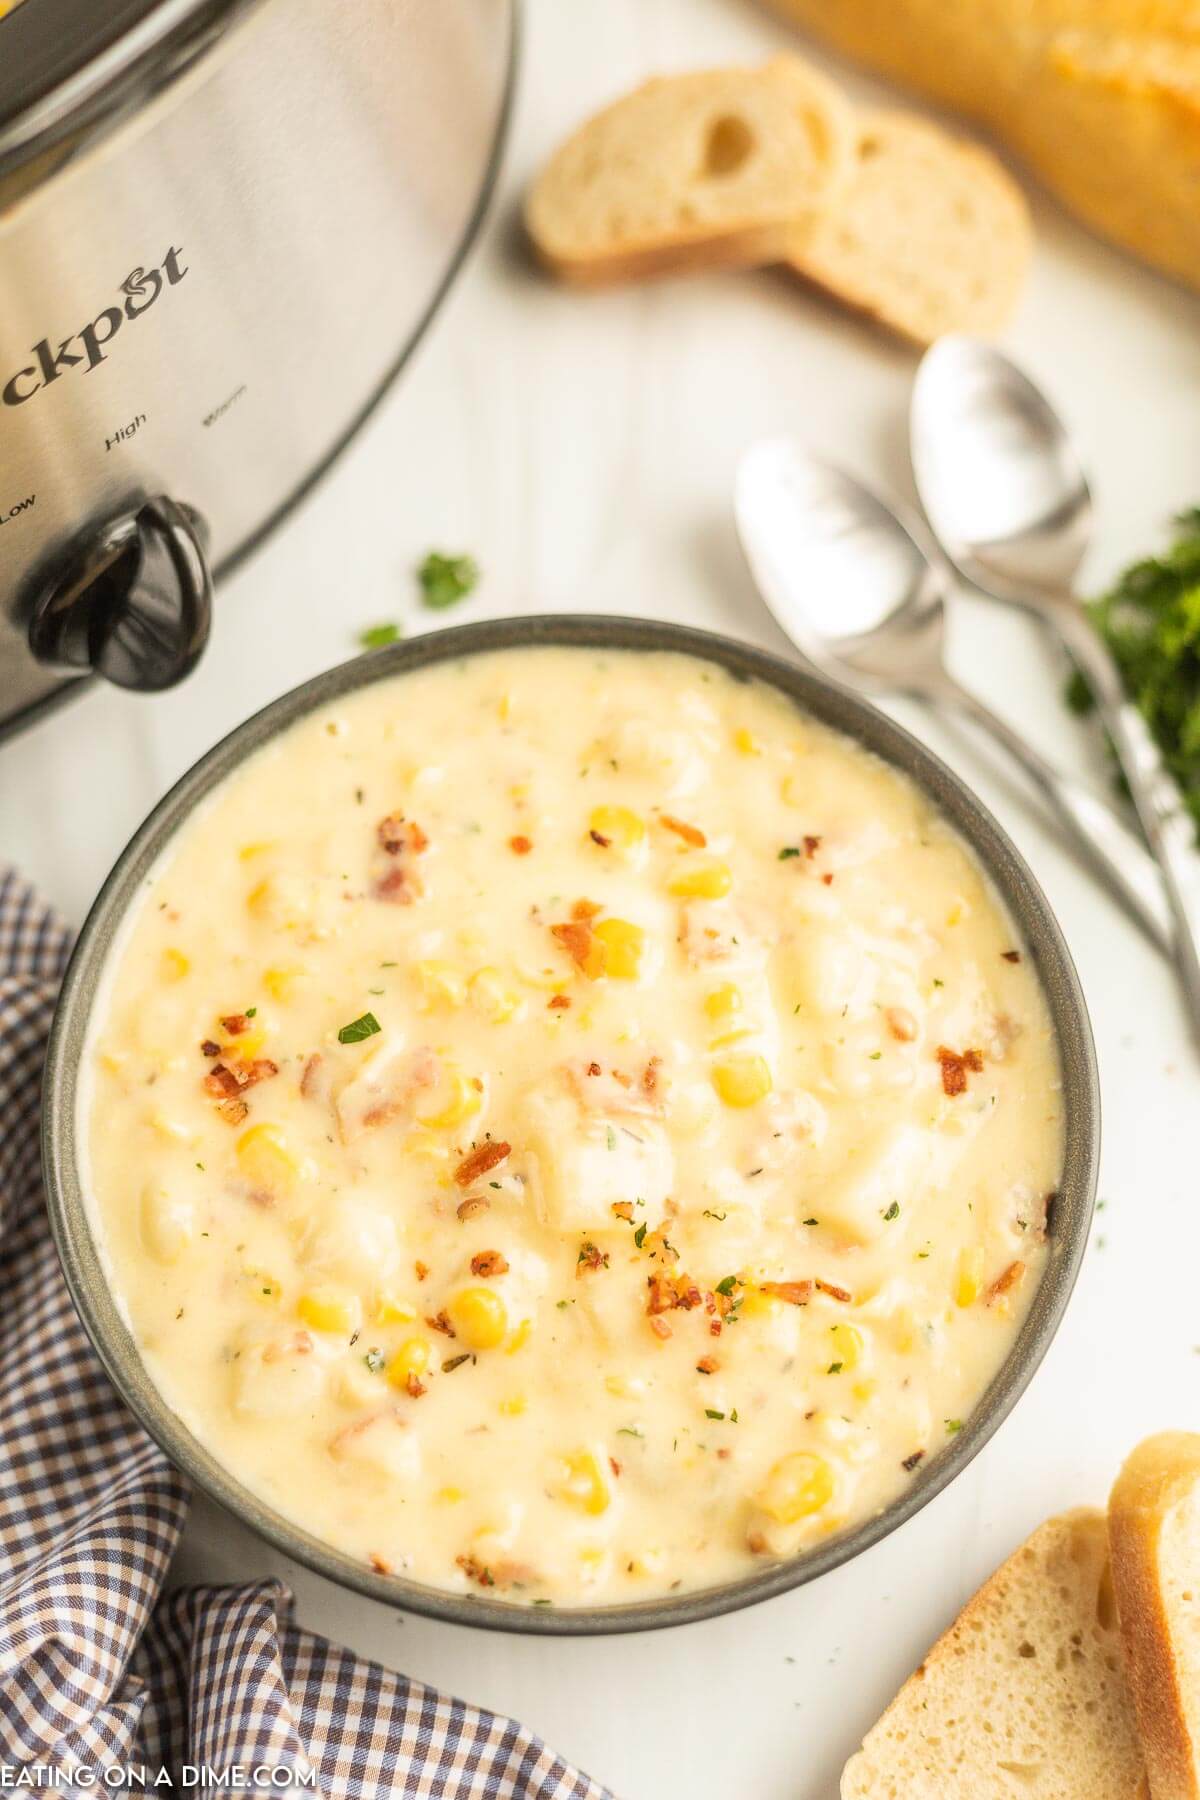 Corn Chowder in a black bowl with a spoon